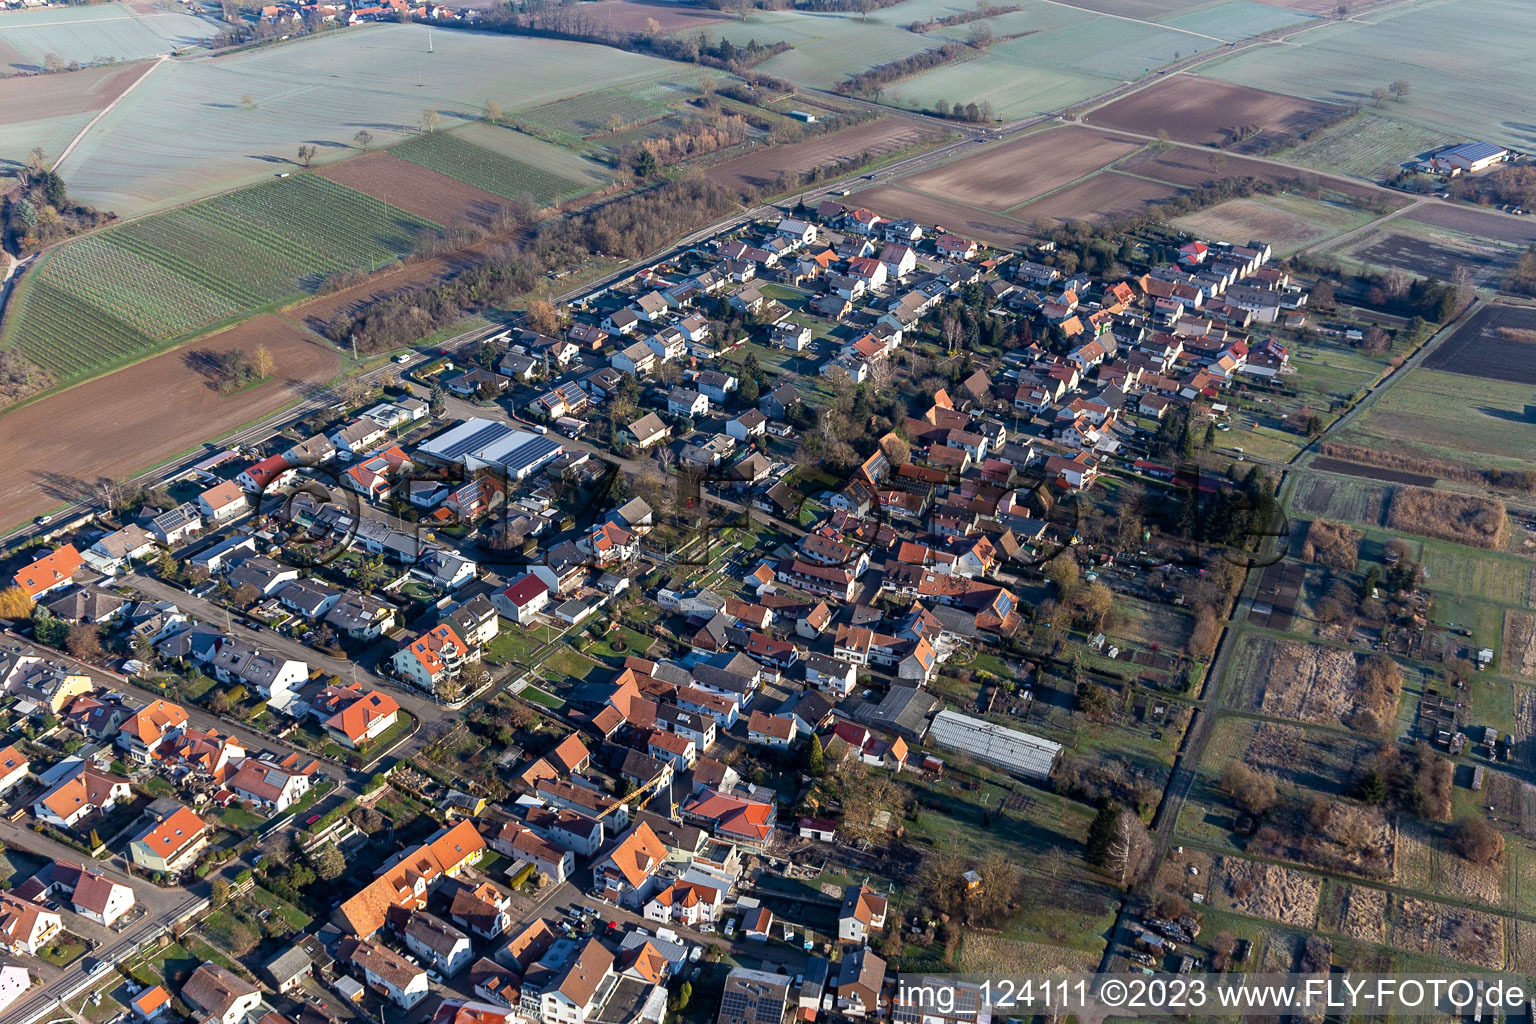 Aerial view of Untere Hauptstrasse, Guttenbergstrasse and Wasgaustrasse in Steinfeld in the state Rhineland-Palatinate, Germany